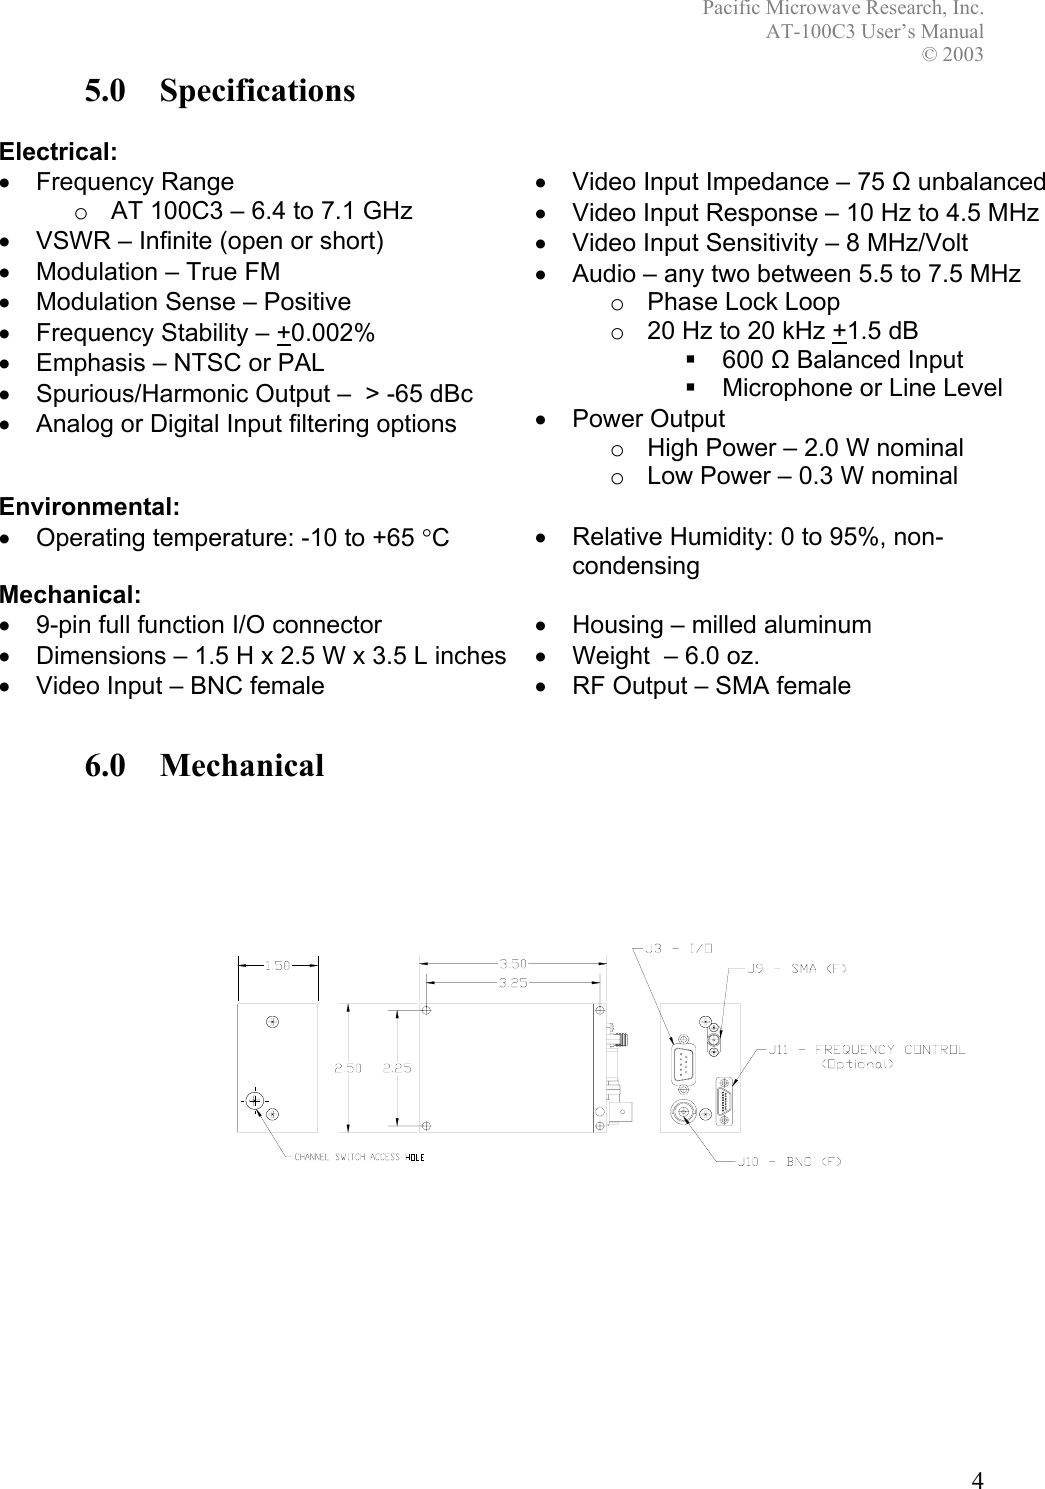 Pacific Microwave Research, Inc. AT-100C3 User’s Manual  © 2003 4 5.0 Specifications  Electrical:  • Frequency Range o  AT 100C3 – 6.4 to 7.1 GHz •  VSWR – Infinite (open or short)  •  Modulation – True FM •  Modulation Sense – Positive •  Frequency Stability – +0.002% •  Emphasis – NTSC or PAL •  Spurious/Harmonic Output –  &gt; -65 dBc •  Analog or Digital Input filtering options  •  Video Input Impedance – 75 Ω unbalanced •  Video Input Response – 10 Hz to 4.5 MHz •  Video Input Sensitivity – 8 MHz/Volt •  Audio – any two between 5.5 to 7.5 MHz o  Phase Lock Loop o  20 Hz to 20 kHz +1.5 dB  600 Ω Balanced Input   Microphone or Line Level • Power Output o  High Power – 2.0 W nominal o  Low Power – 0.3 W nominal Environmental:  • Operating temperature: -10 to +65 °C  •  Relative Humidity: 0 to 95%, non-condensing Mechanical:  •  9-pin full function I/O connector  •  Housing – milled aluminum •  Dimensions – 1.5 H x 2.5 W x 3.5 L inches  •  Weight  – 6.0 oz. •  Video Input – BNC female  •  RF Output – SMA female  6.0 Mechanical  